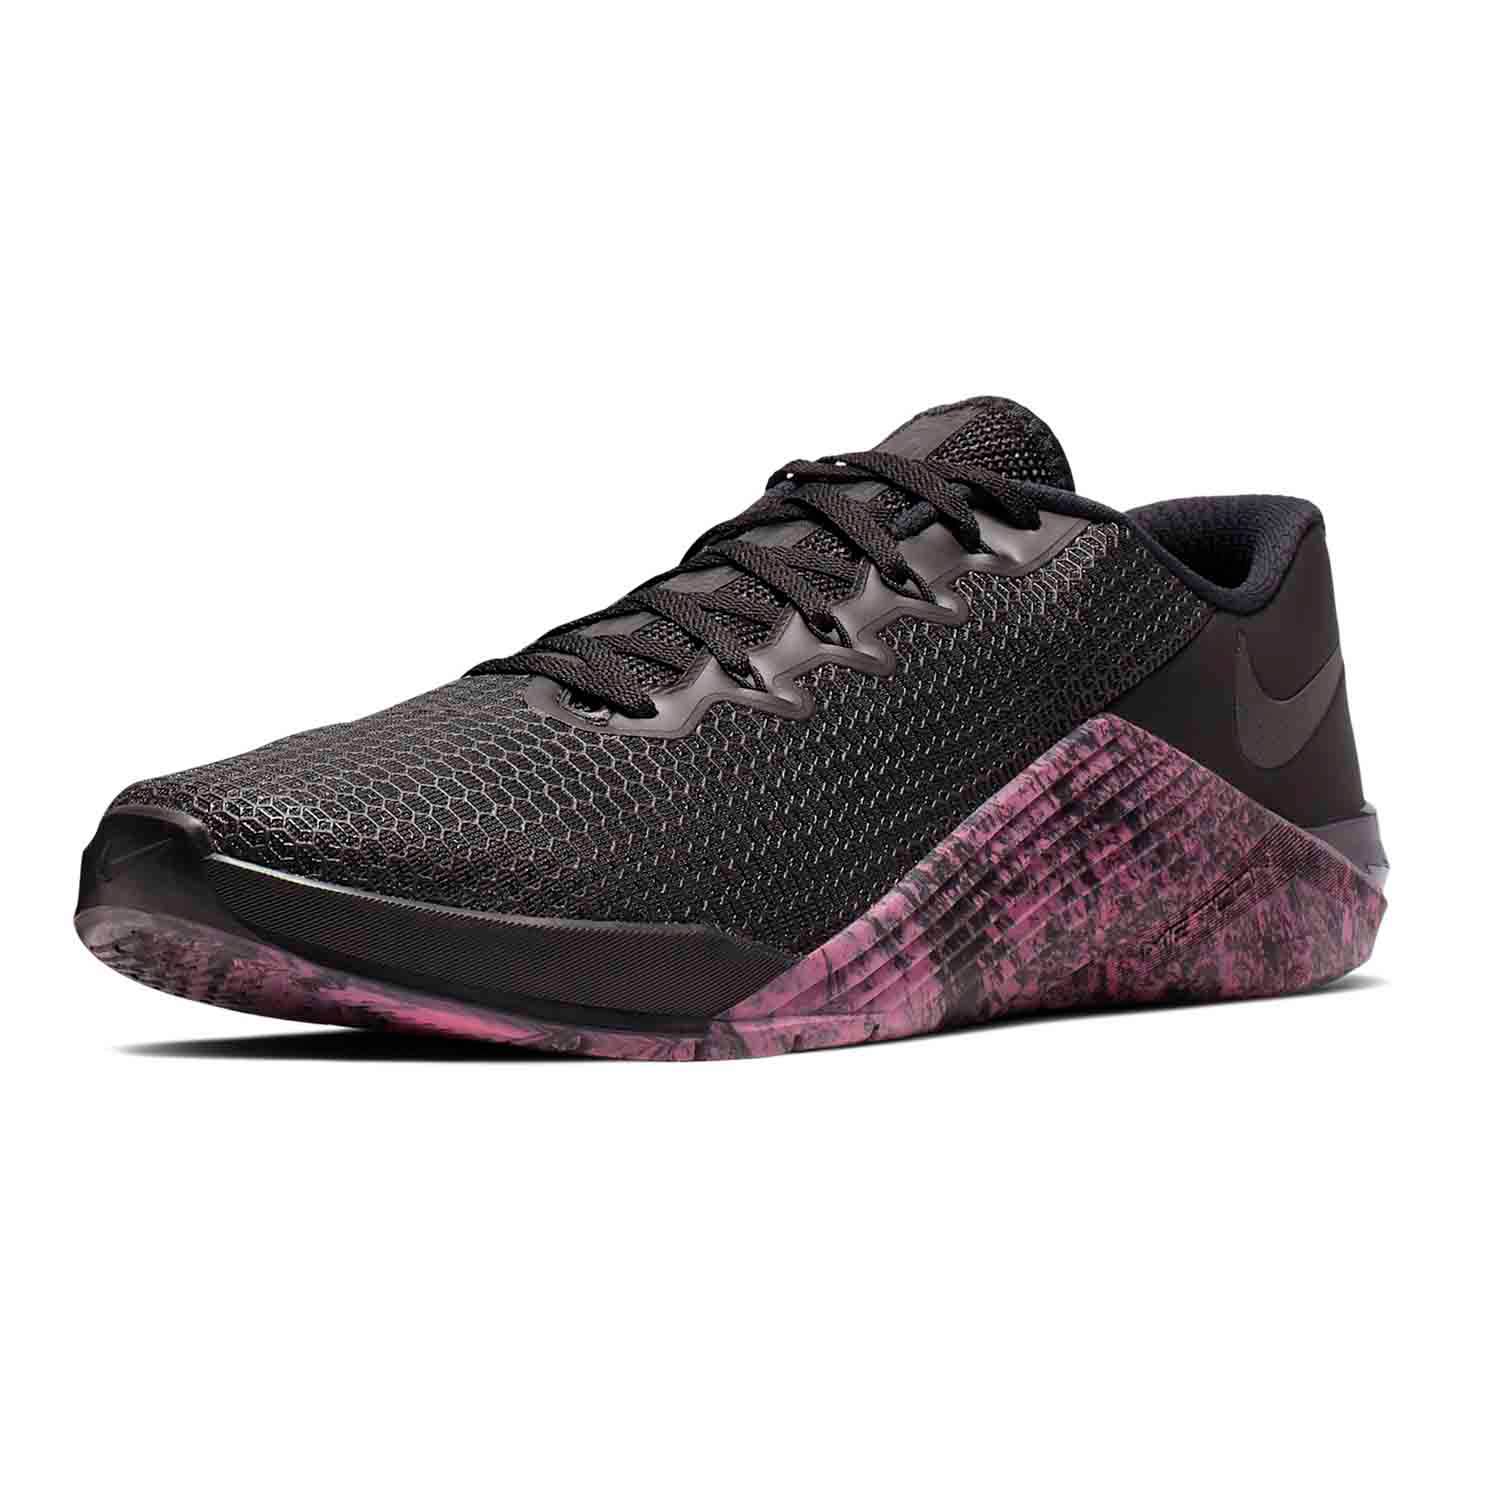 nike metcon 5 pink and grey